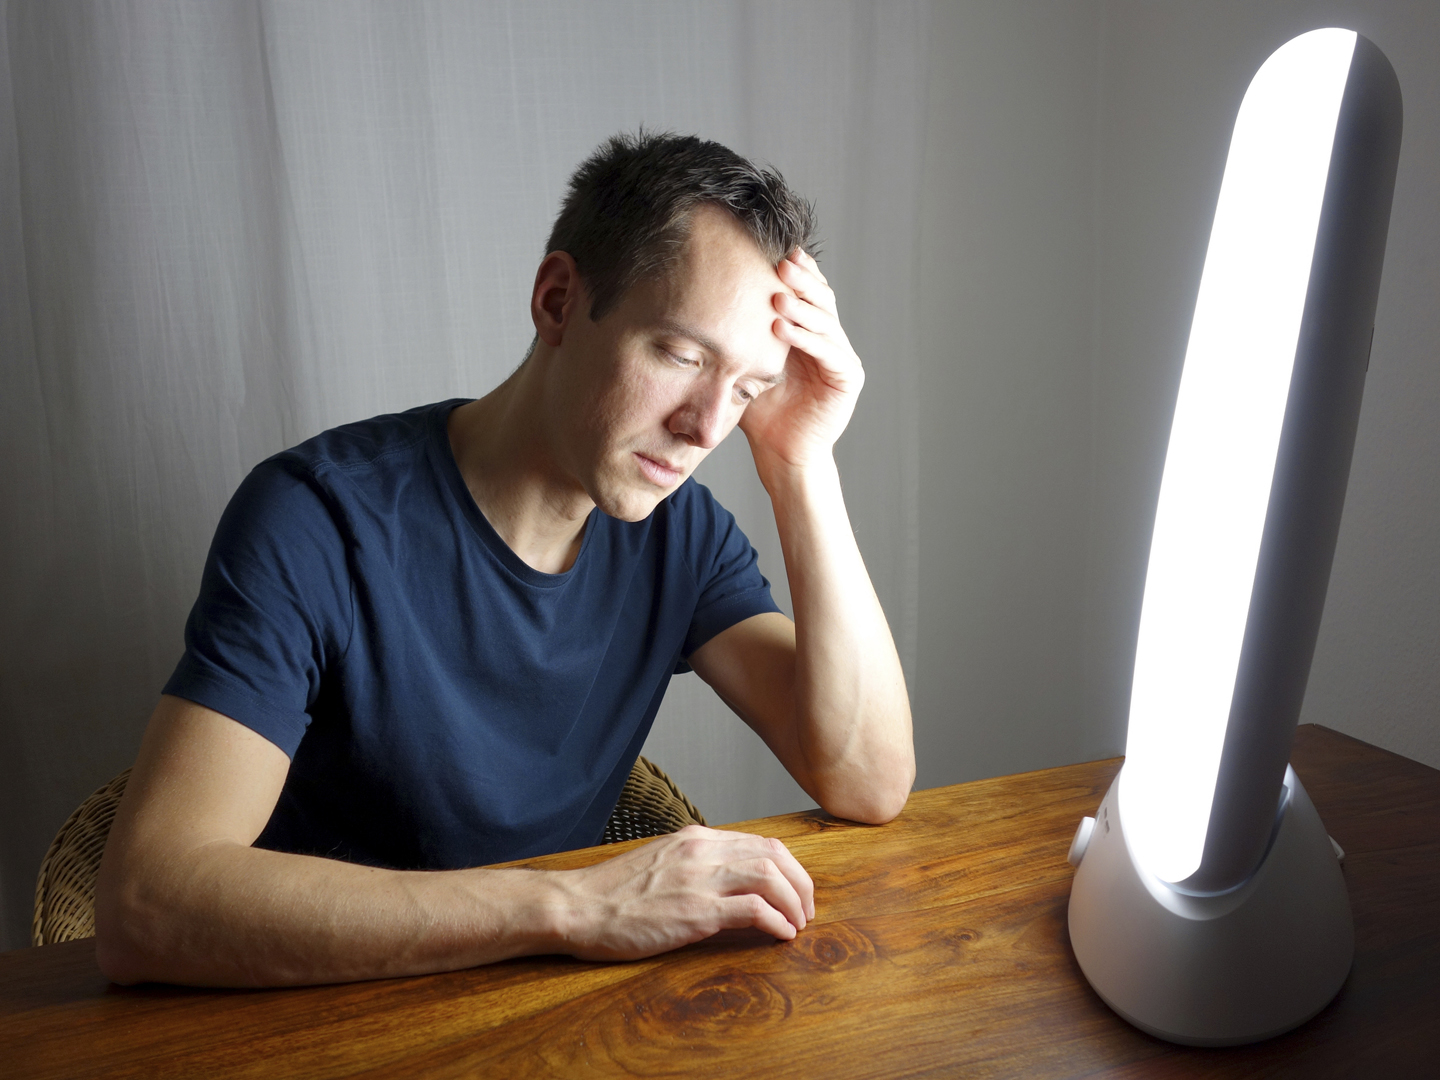 Light therapy is a common treatment for a variety of conditions, from auto-immune disorders like psoriasis and eczema, to wound healing, to depression and seasonal affective disorder, to circadian rhythm sleep disorders